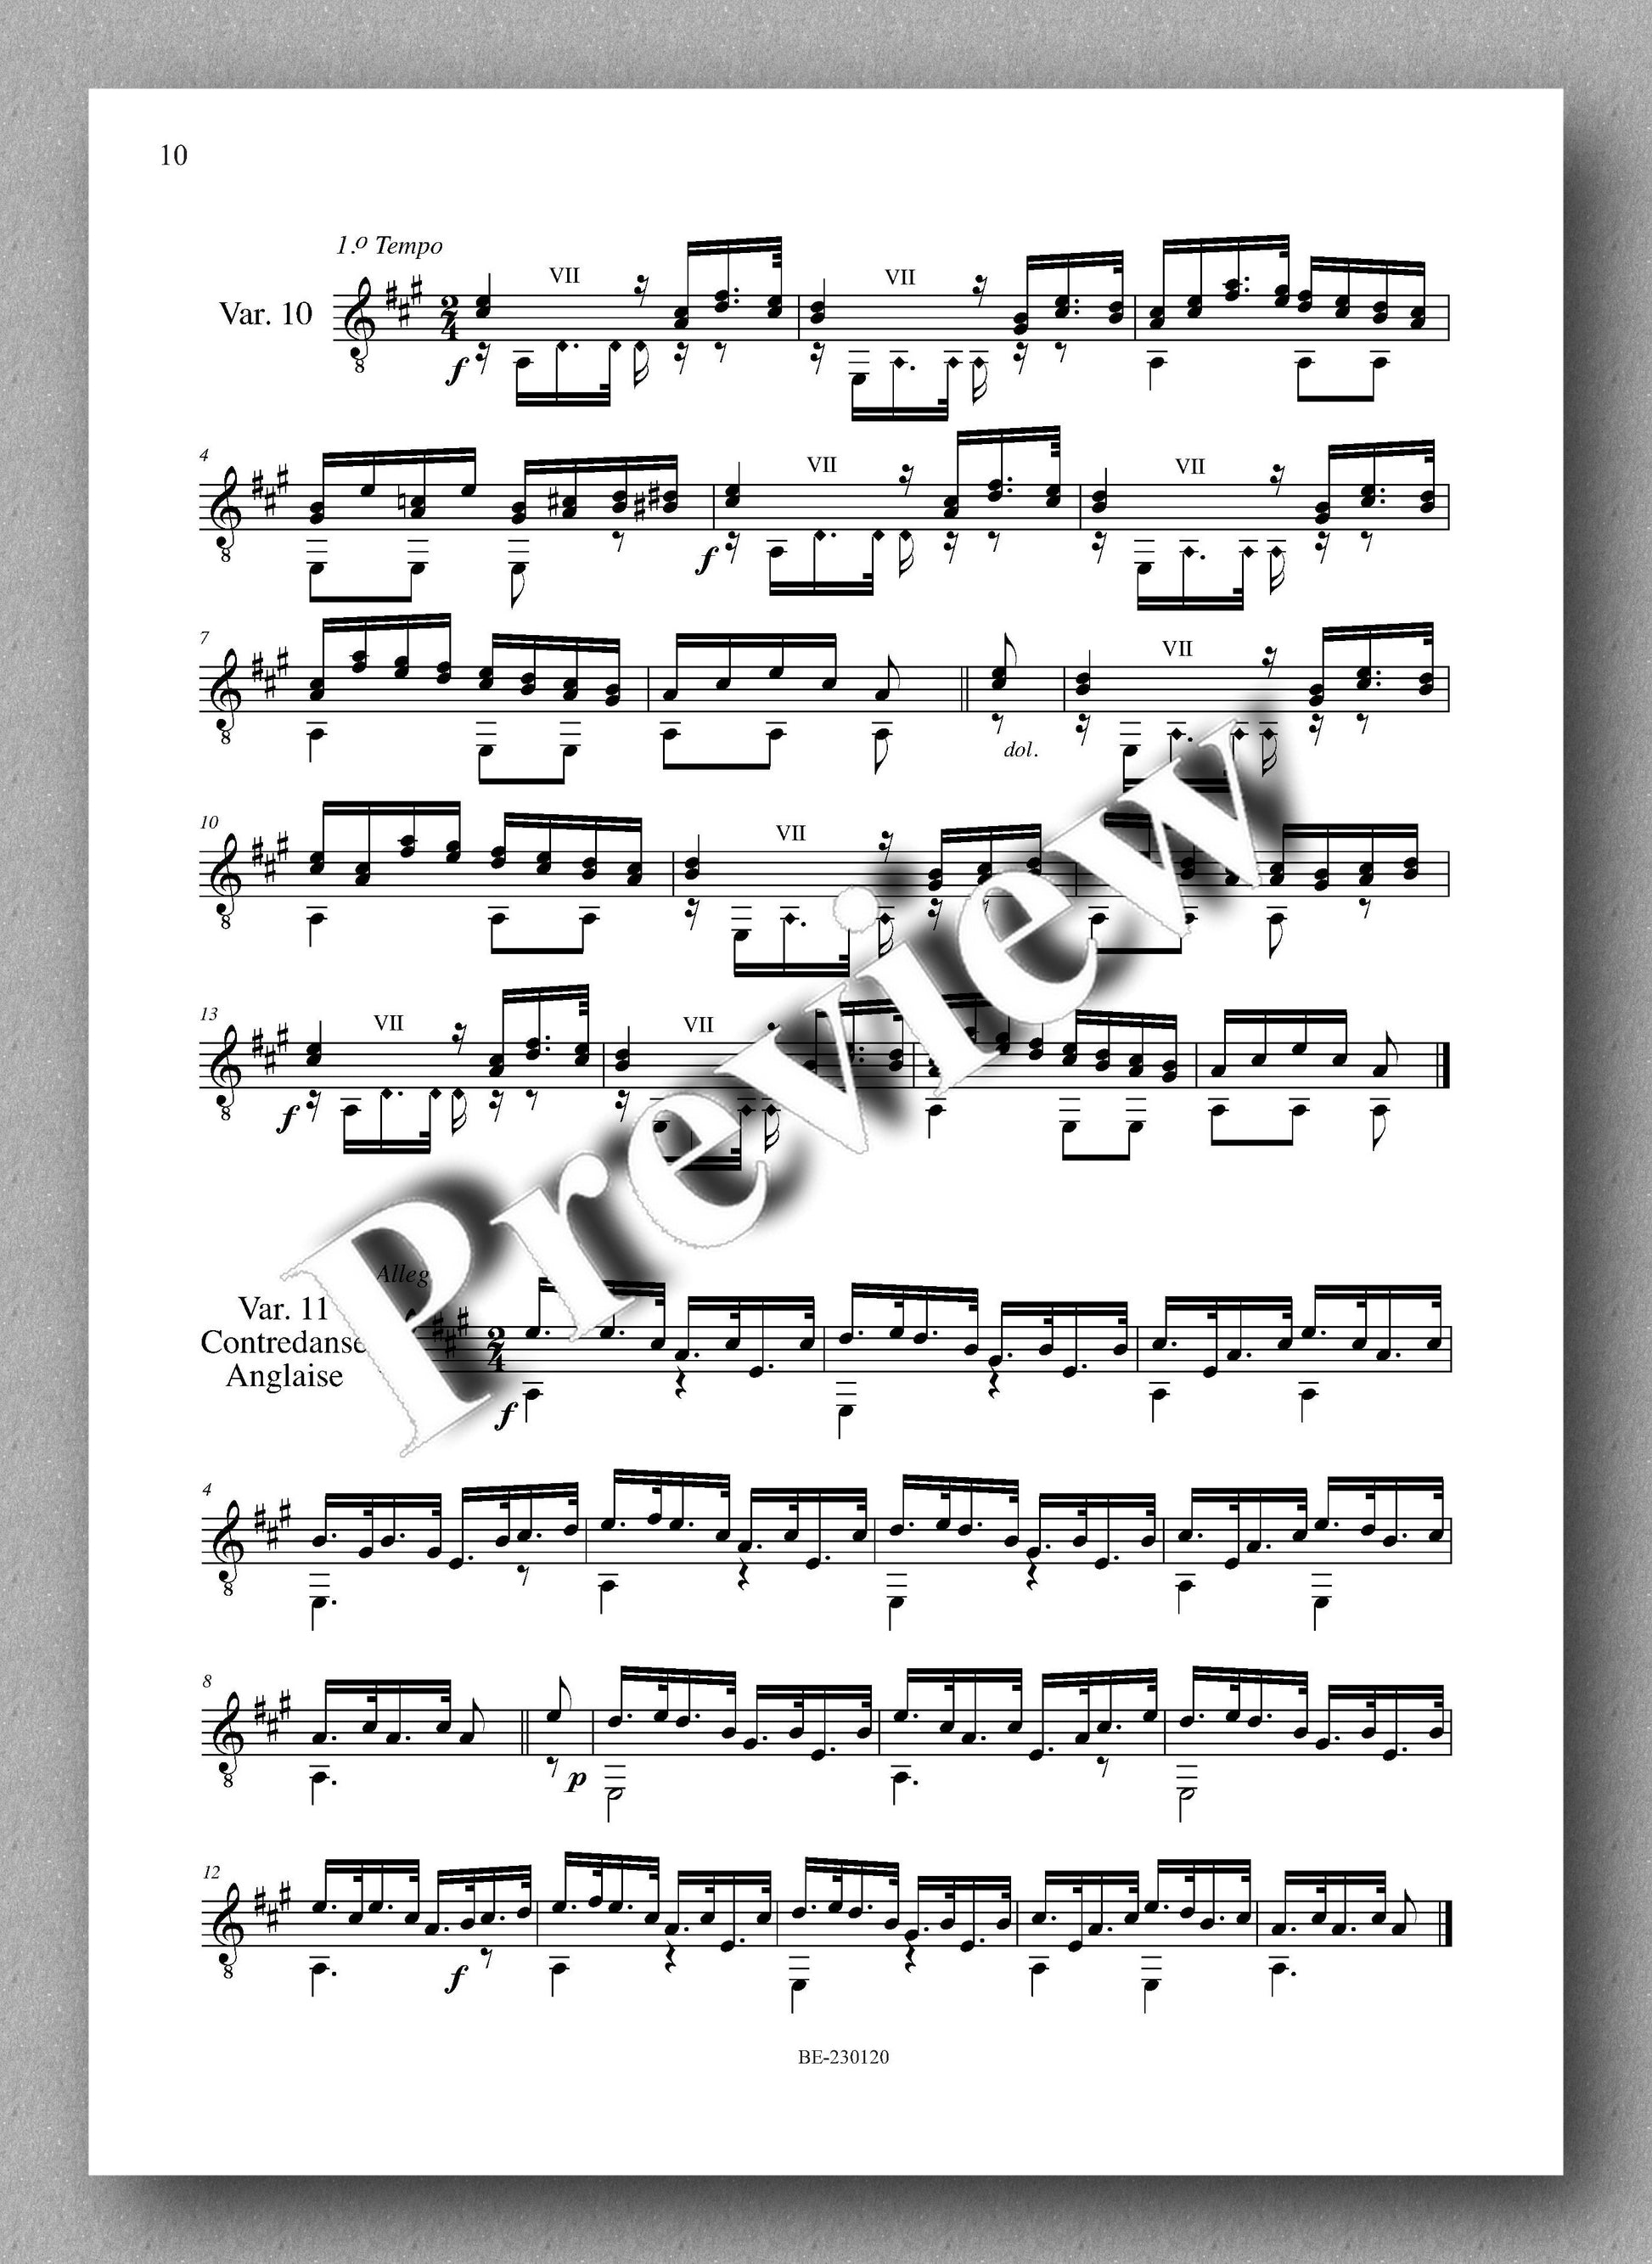 Molino, Collected Works for Guitar Solo, Vol. 32 - preview of the music score 2